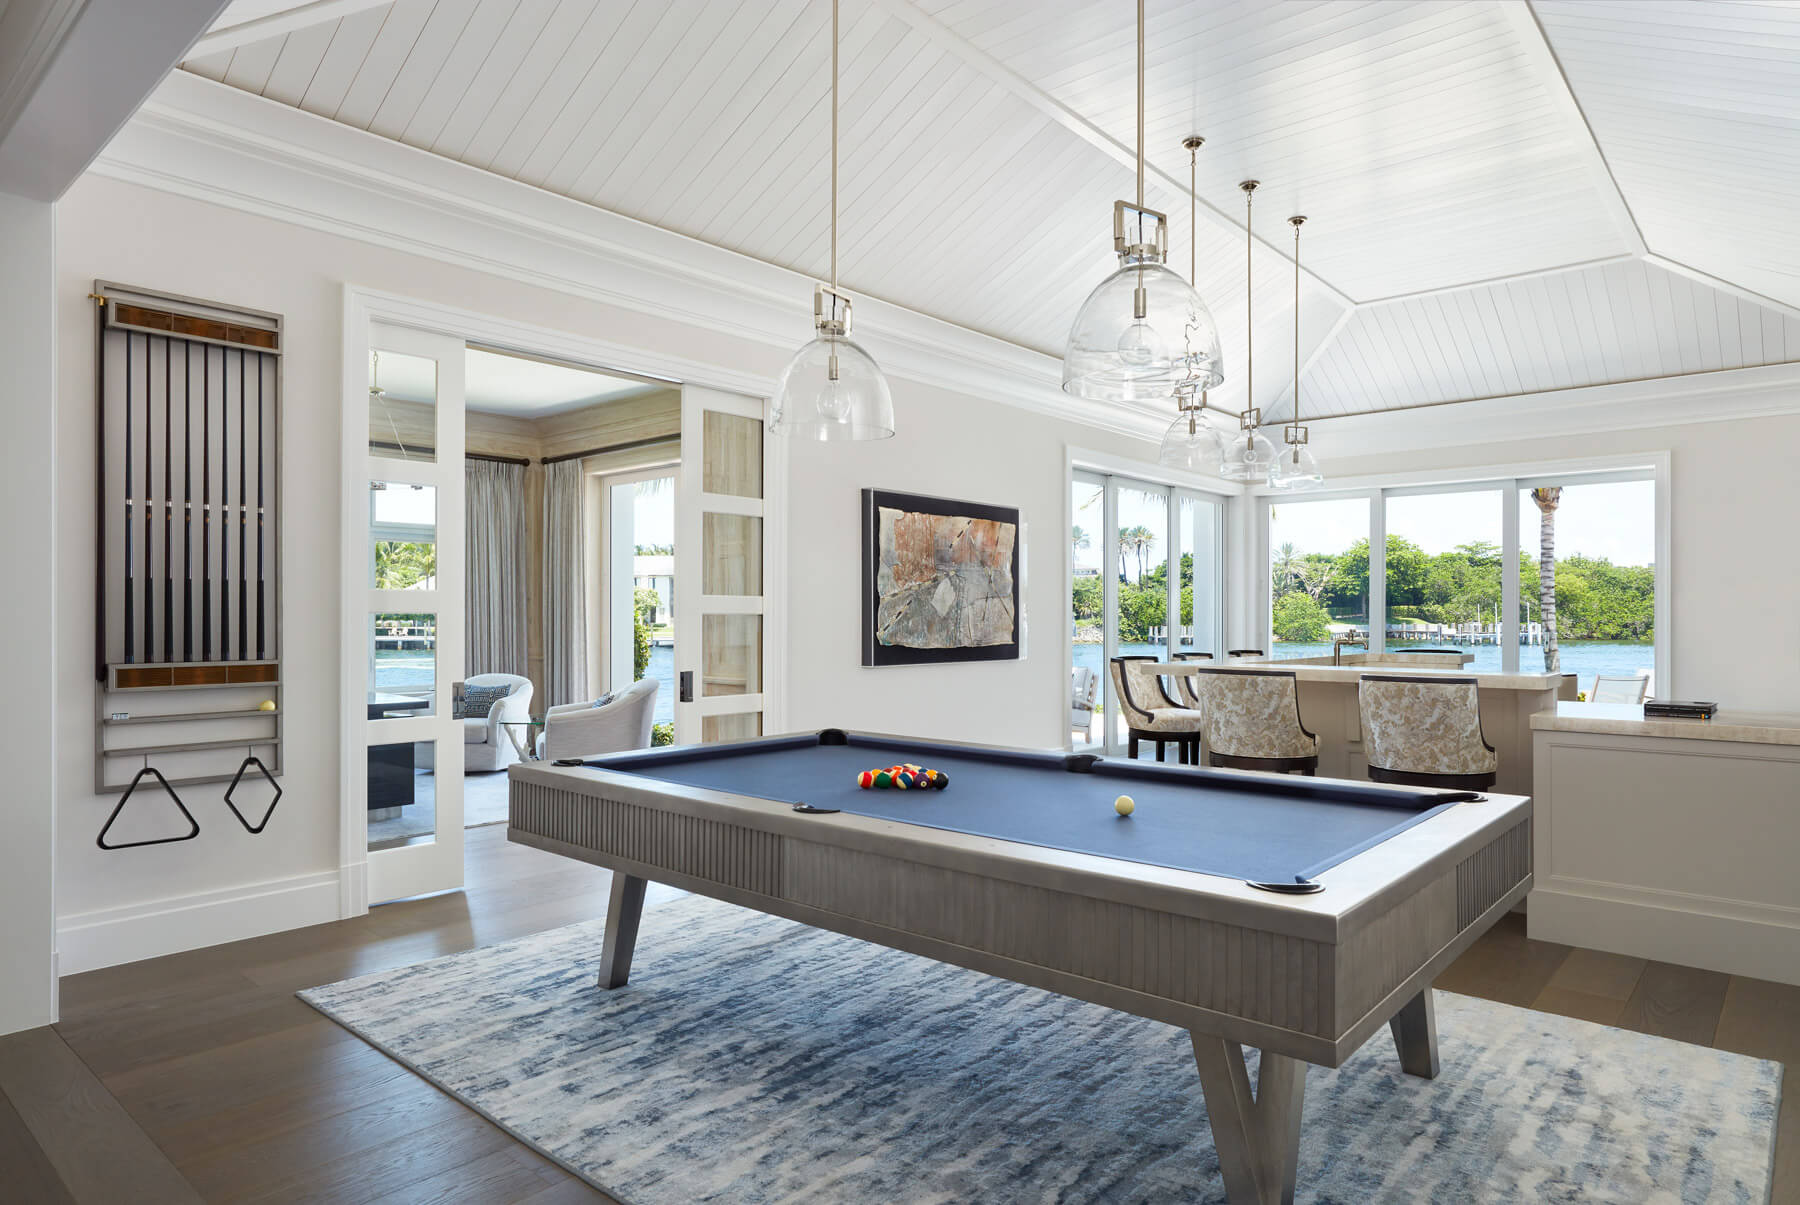 A pool table in the middle of a room with a large rug.